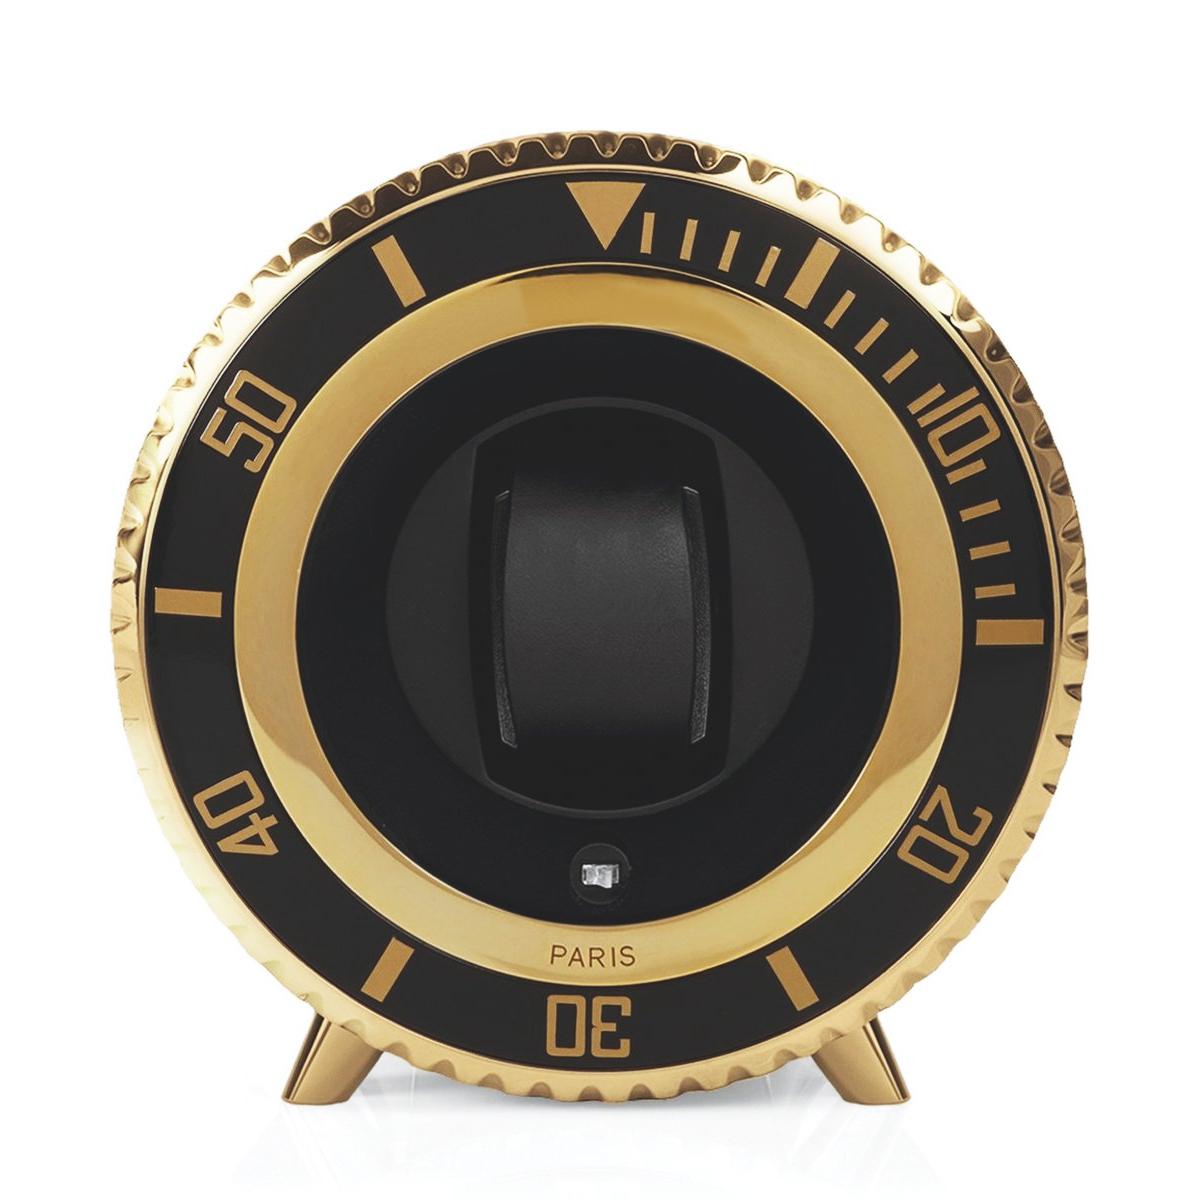 Watch Winder gold leather with bezel in blackened aluminium, structure
in aluminium in nickel finish. Rotating small case for automatic watches
covered with golded calfskin in nickel finish. Integrated watch winder with a 
cycle of 1600